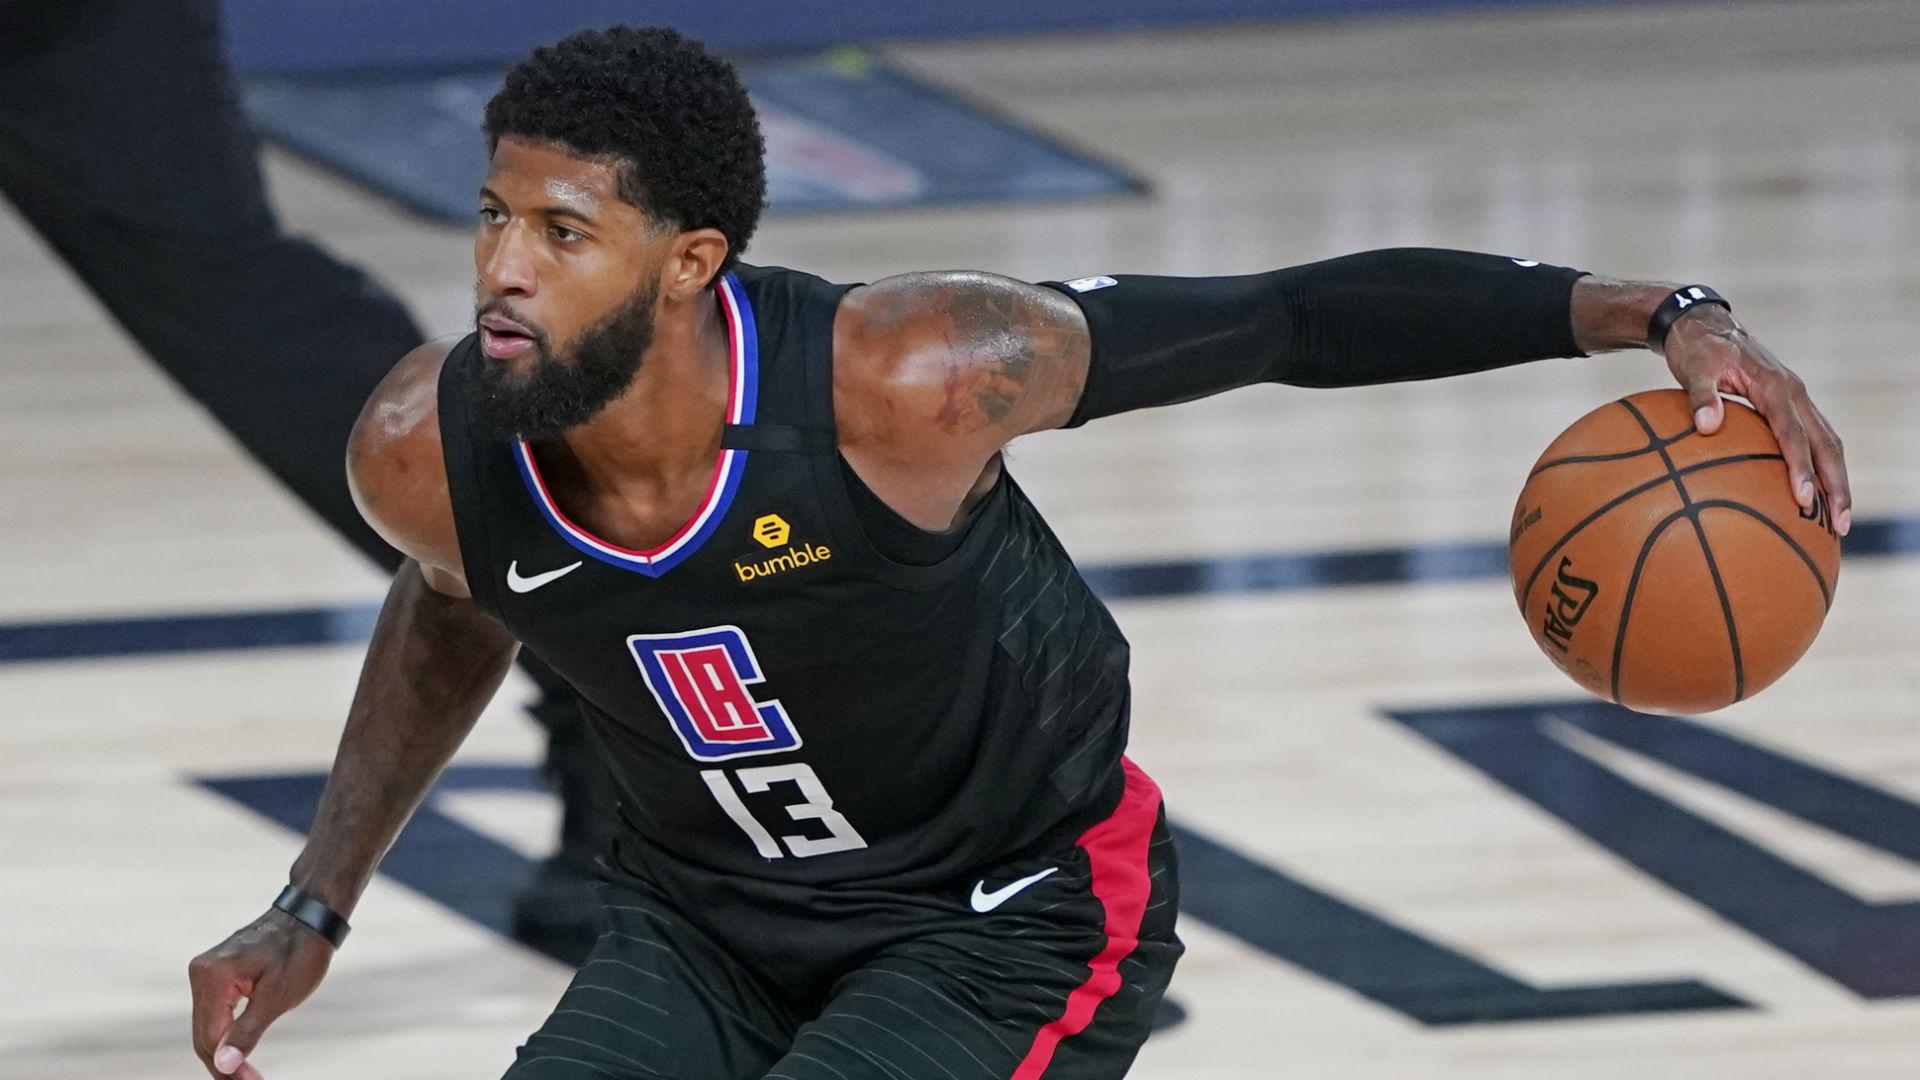 Will Paul George Remain With the Los Angeles Clippers or Consider Joining the New York Knicks or Philadelphia 76ers?